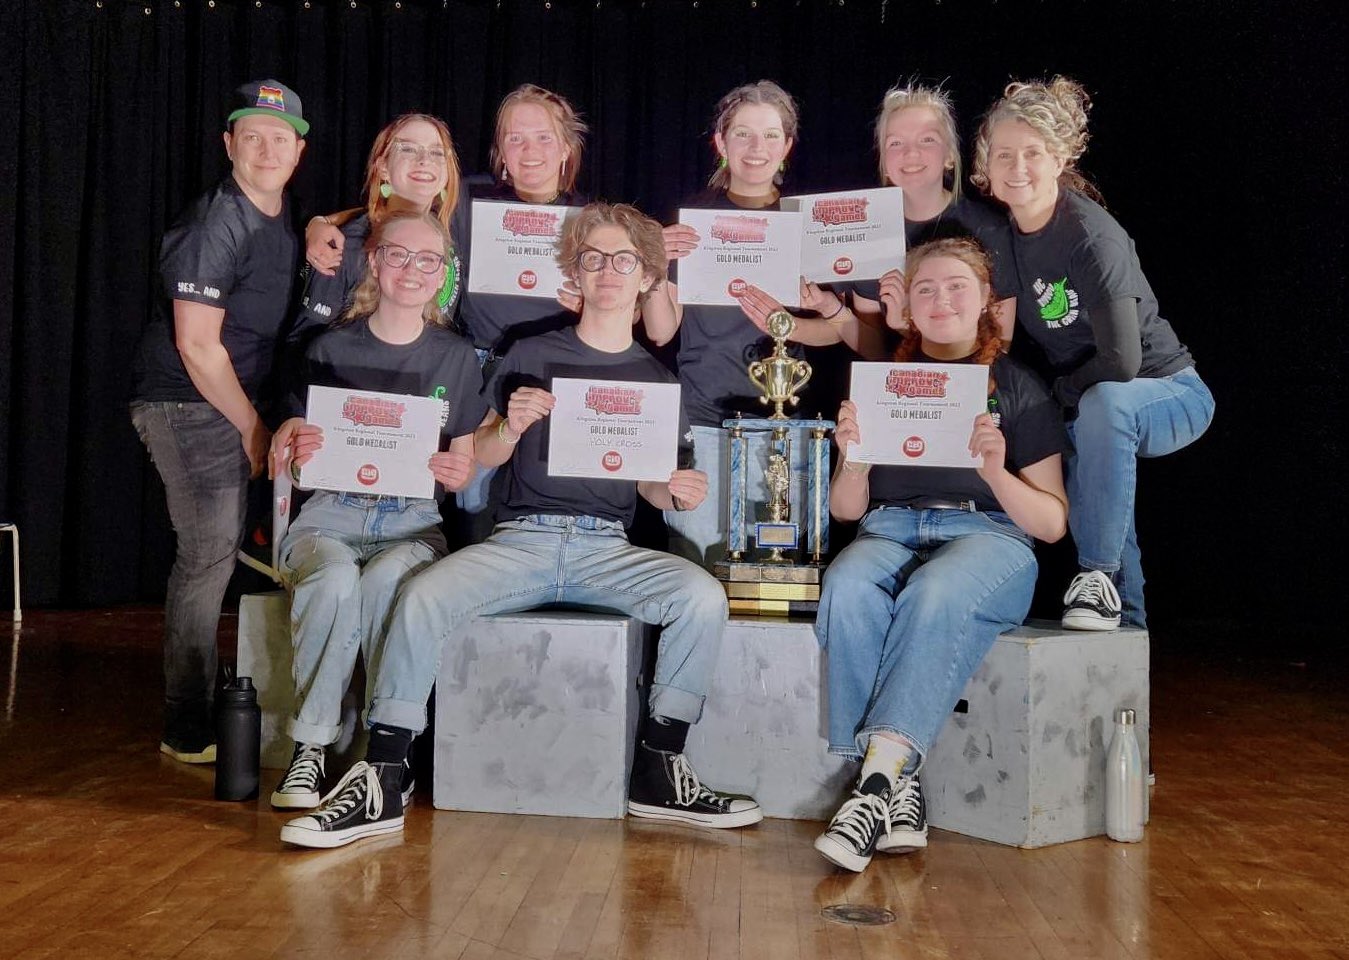 All eight Green Beans Improv Team pictured holding “Gold Medalist" certificates from the Canadian Improv Games.